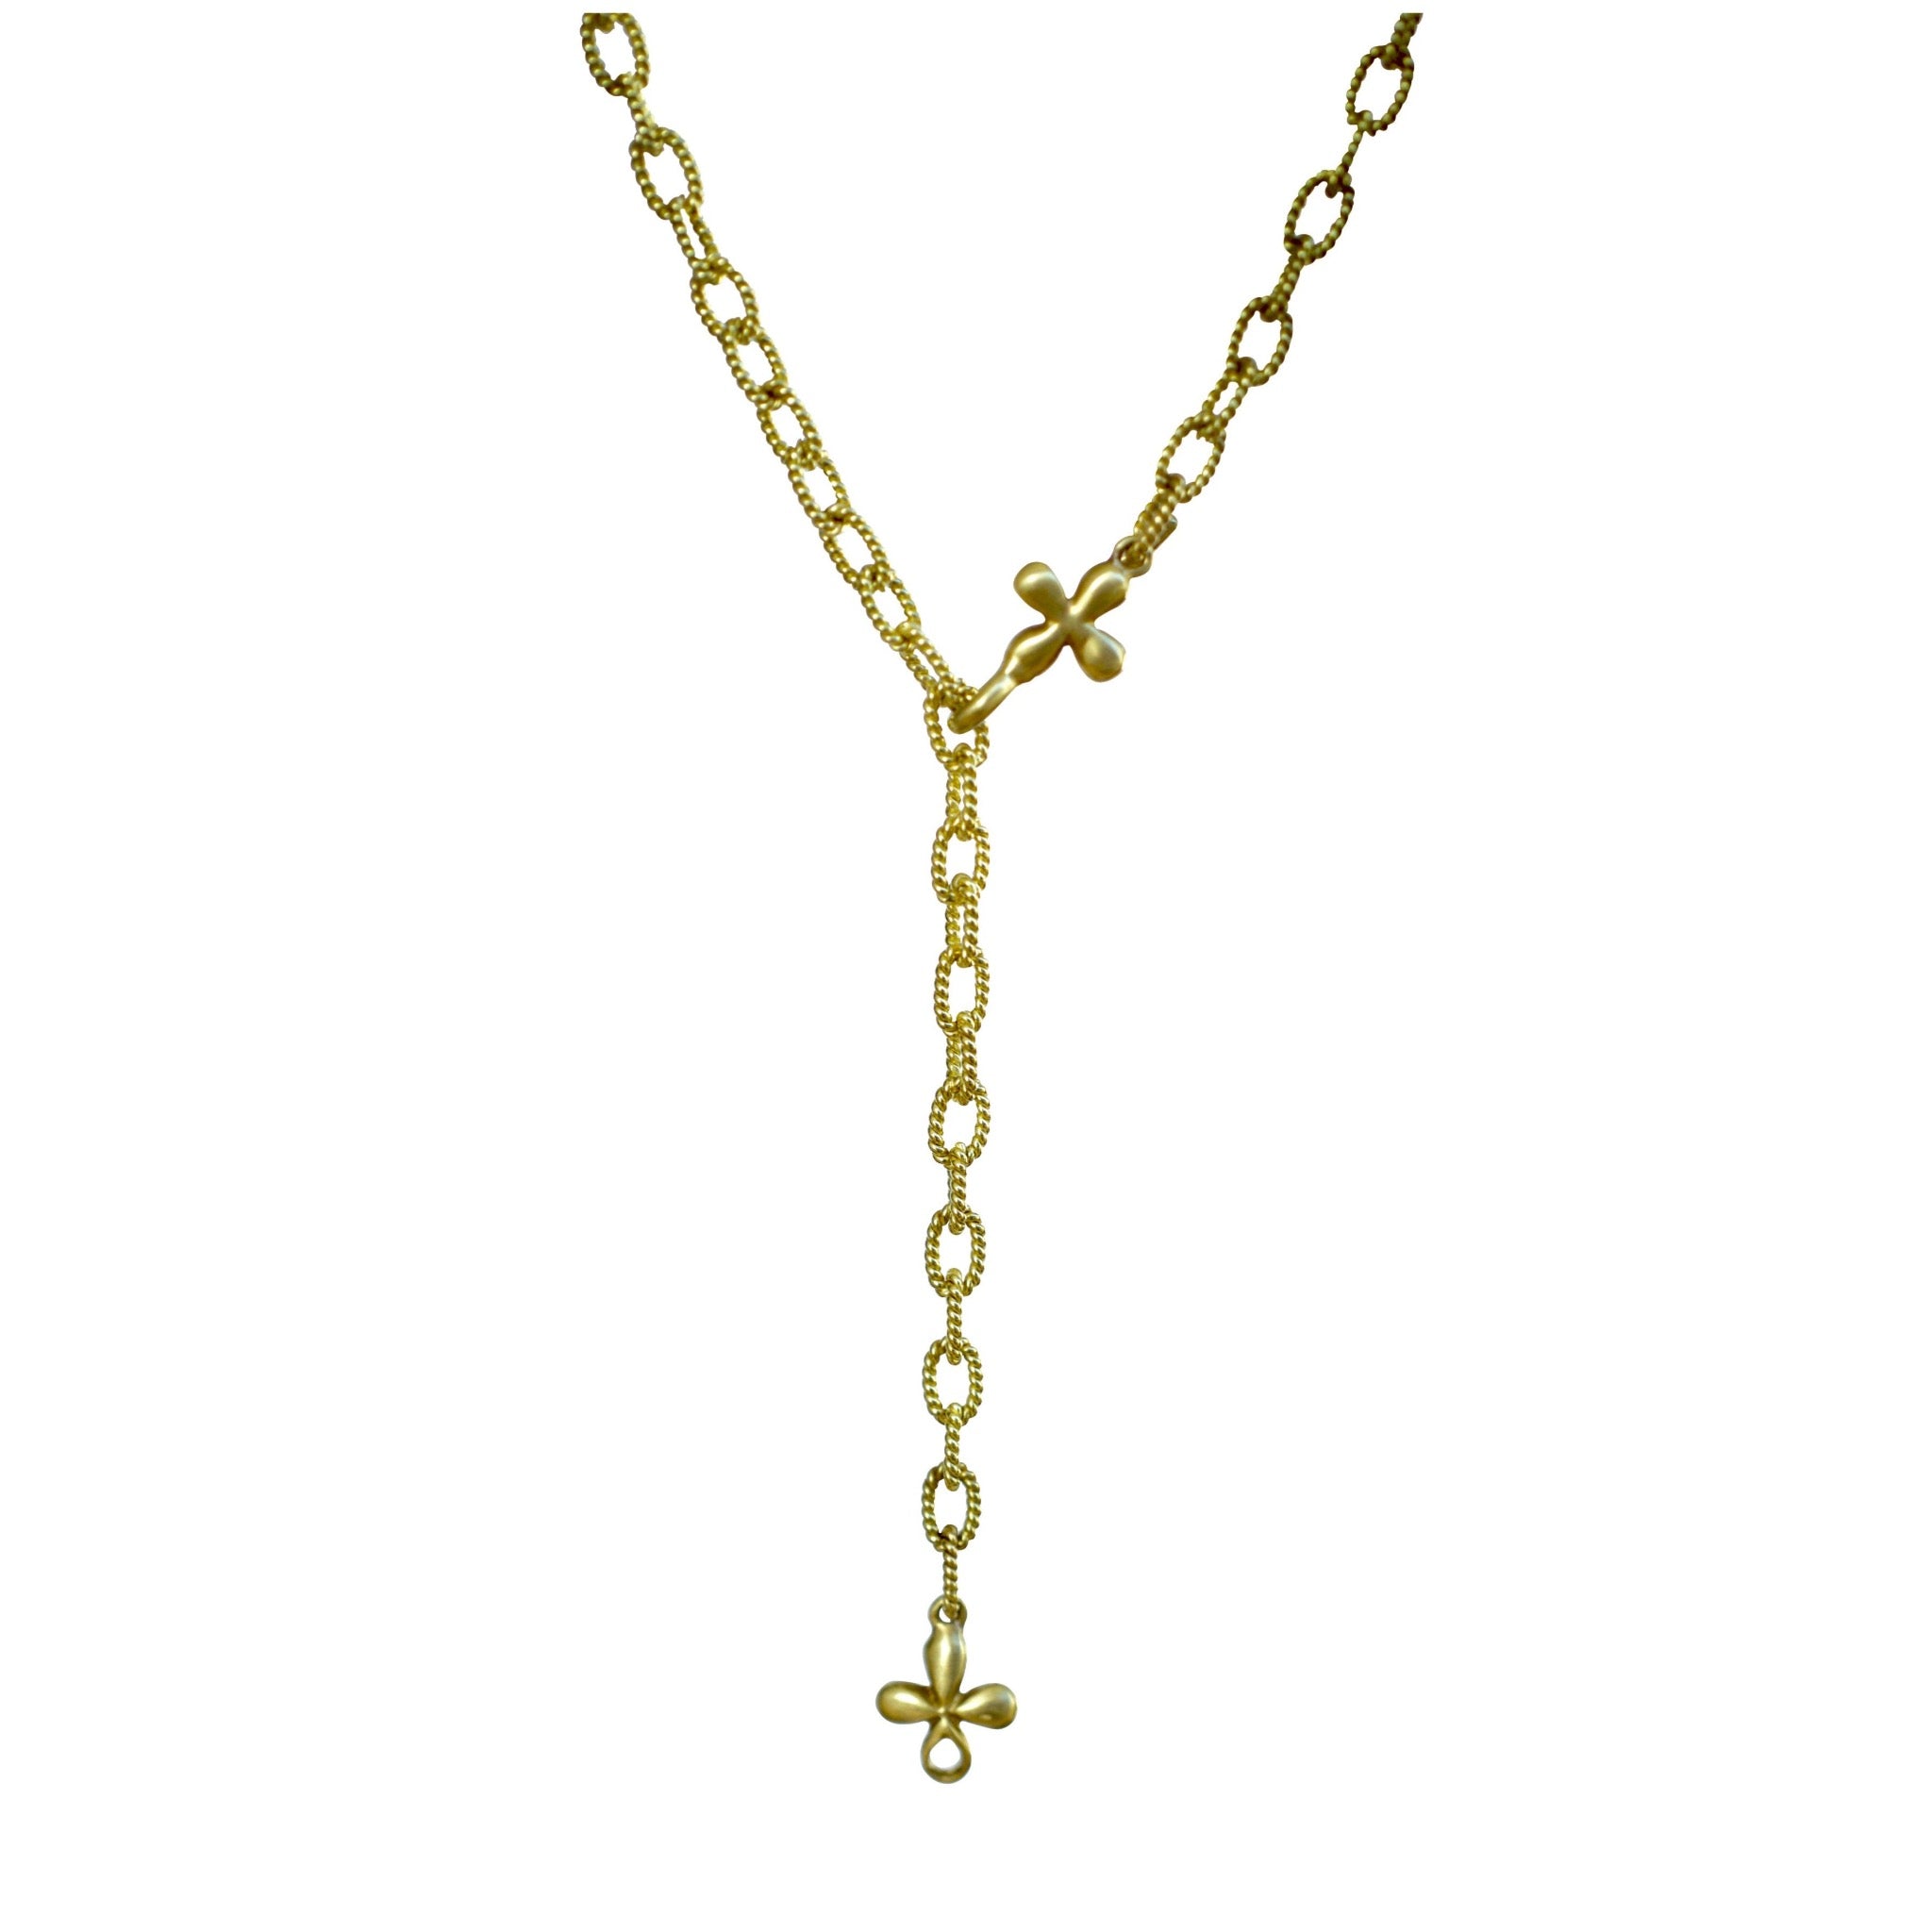 Heavy chain necklace